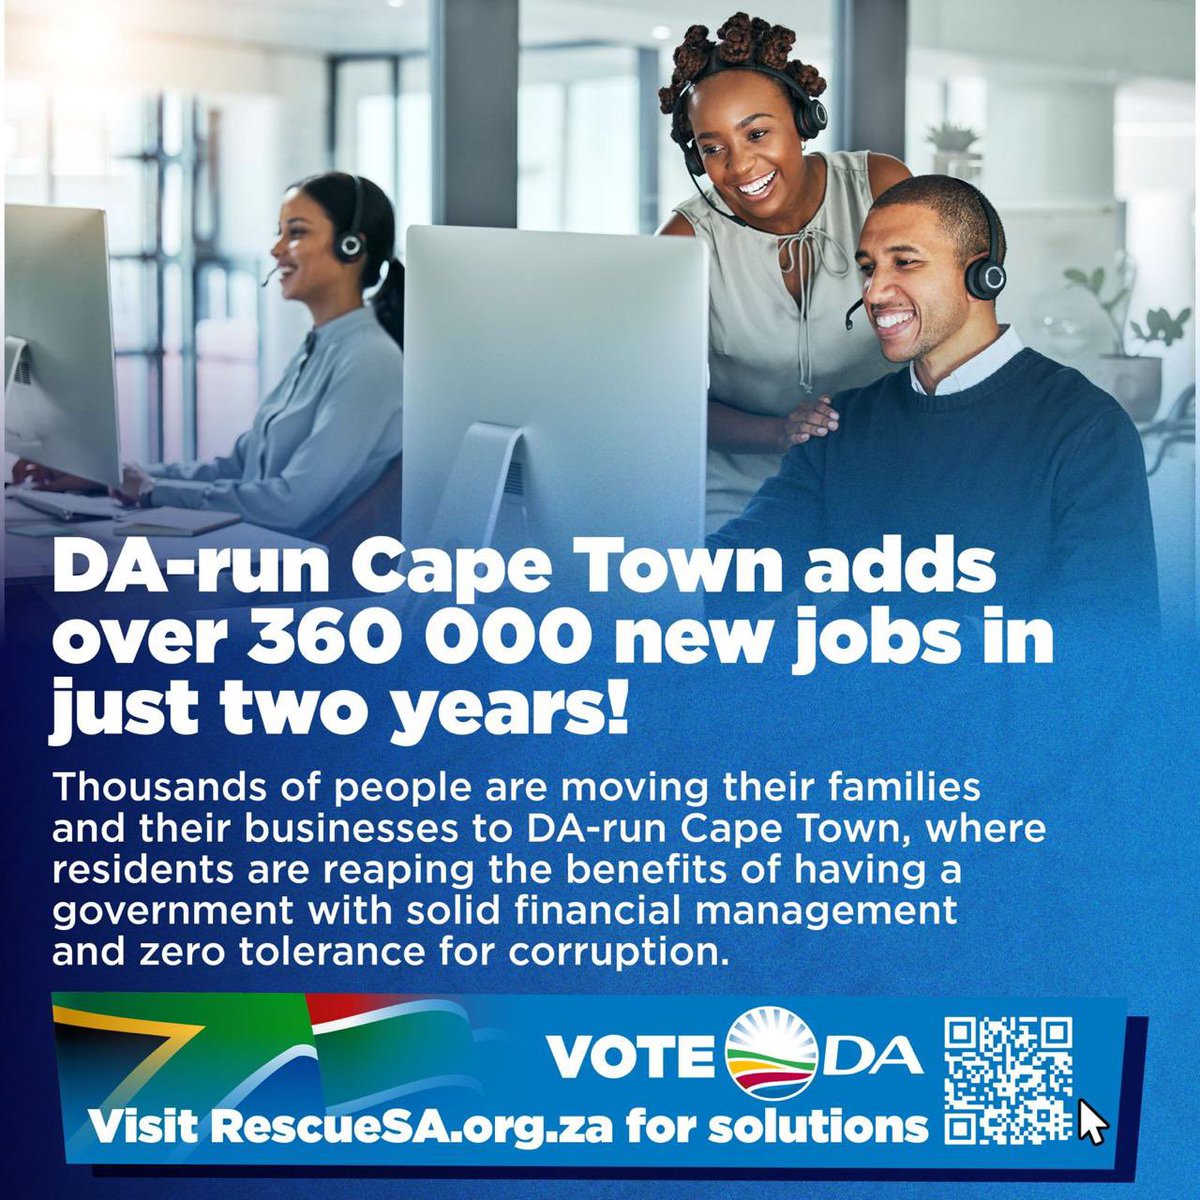 🎉 The DA-run City of Cape Town has added over 360 000 new jobs in just two years! Thousands of people are moving their families and businesses to DA-run Cape Town. Residents under DA governments experience the benefits of the DA's solid financial management and good governance.